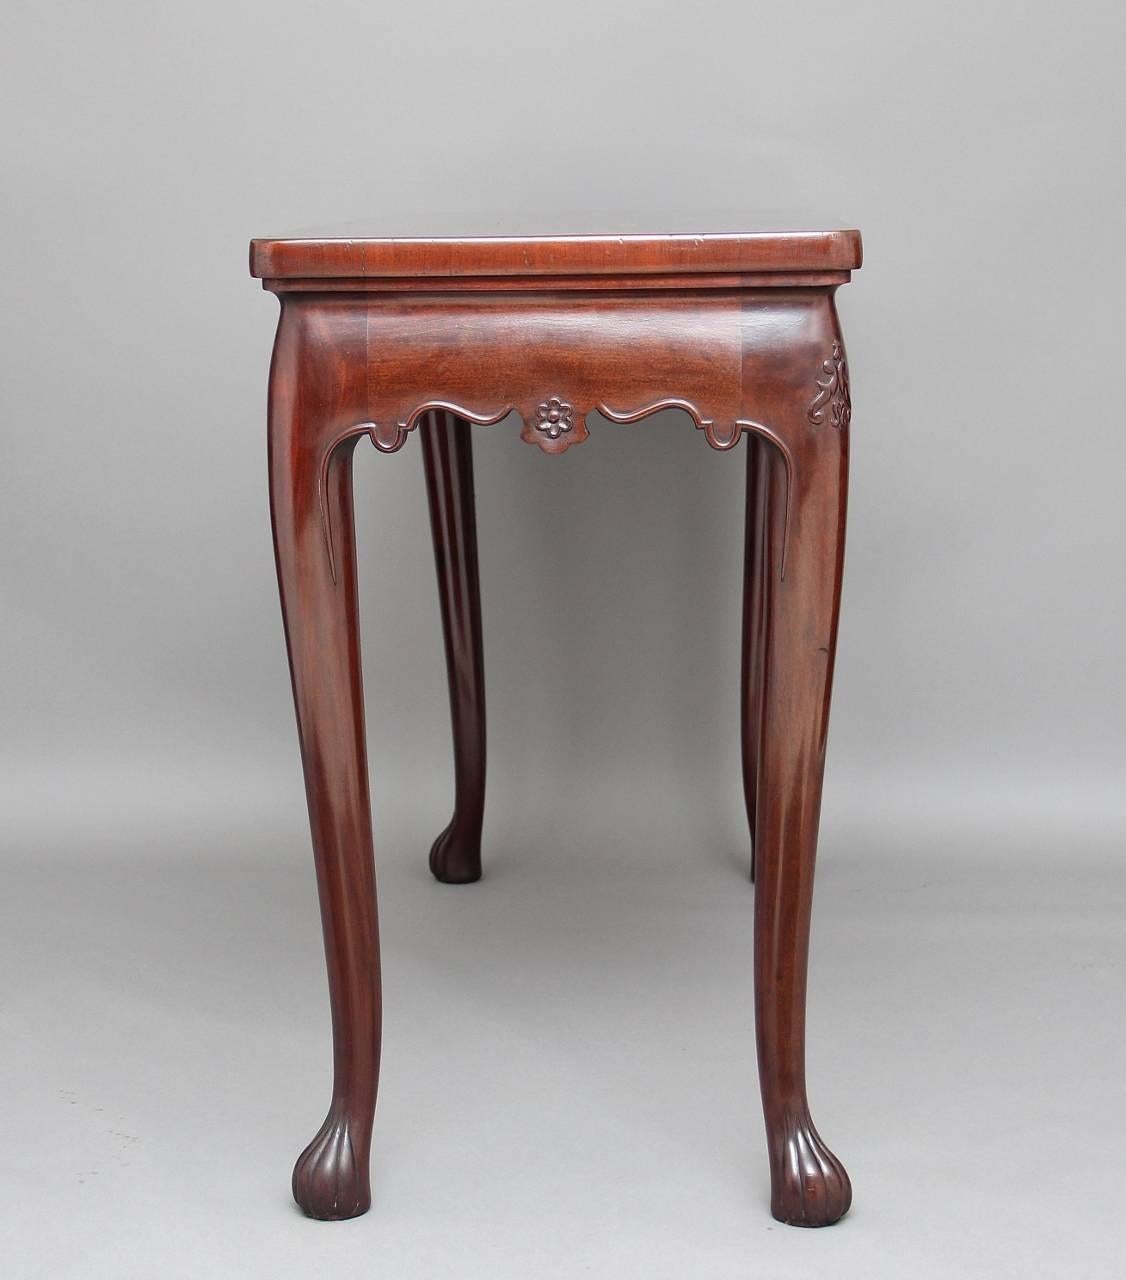 A freestanding 18th century mahogany serving or side table, possibly Irish with a bull nose moulded top, below along the front and sides having a nice beaded shaped apron with floral carved decoration, standing on lovely carved slender legs